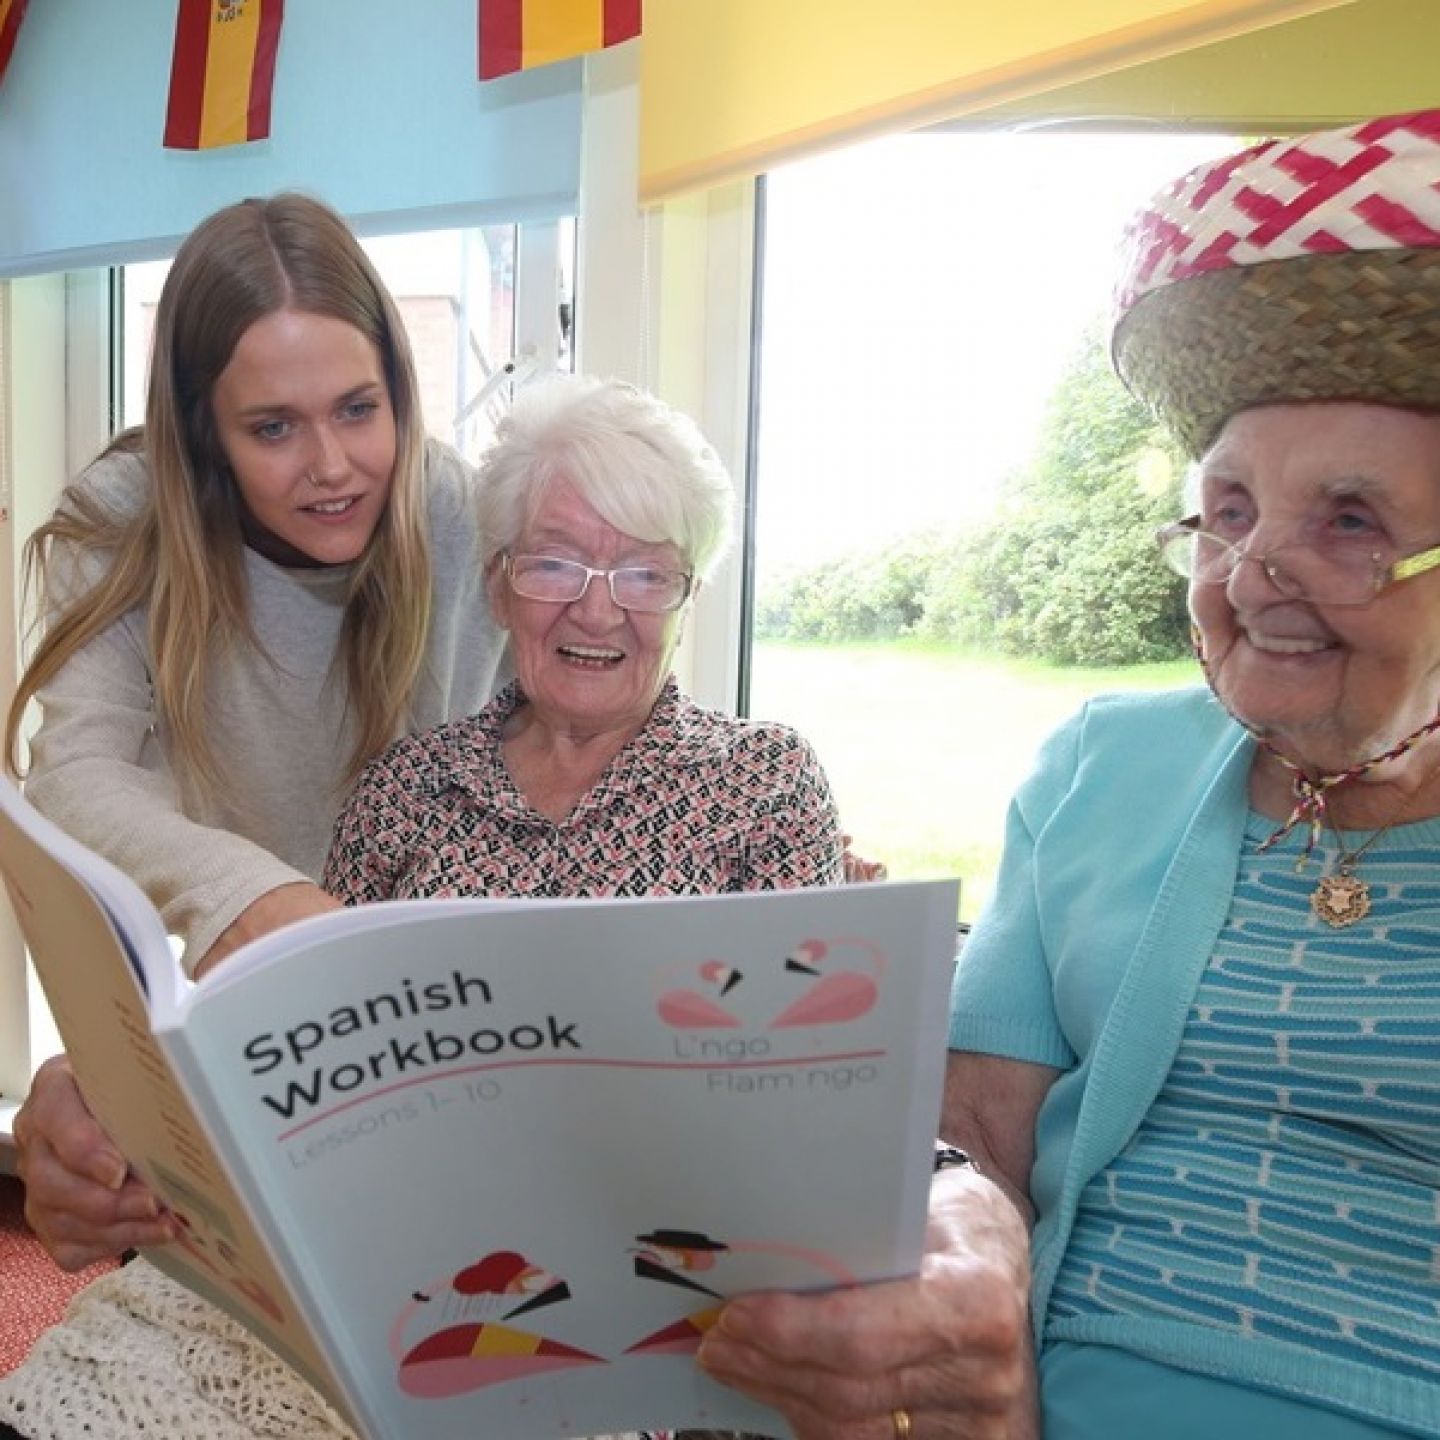 An image of a teacher giving language class in a care home for two residents.